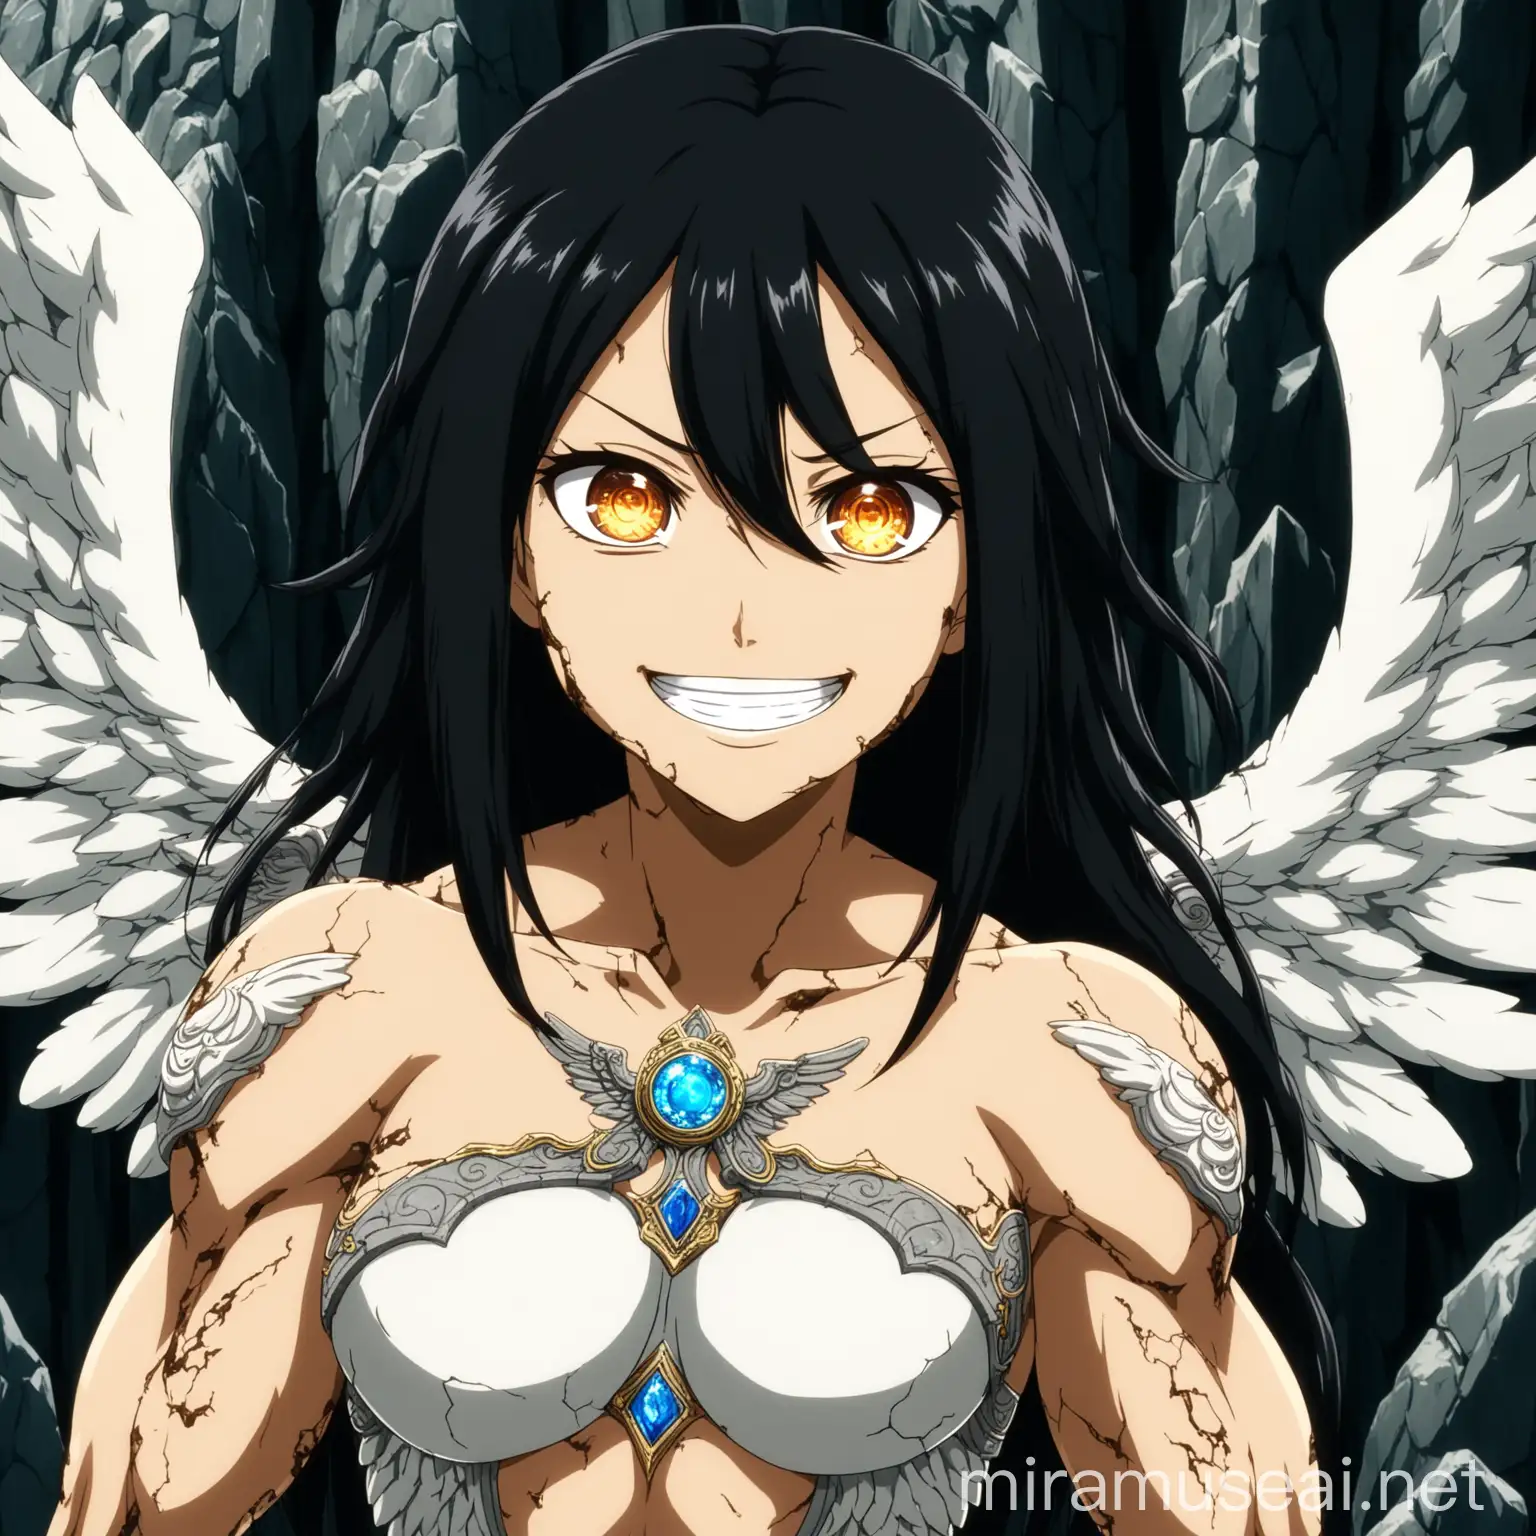 Muscular Stone Angel with Wild Black Hair and Luminescent Eyes in Anime Style